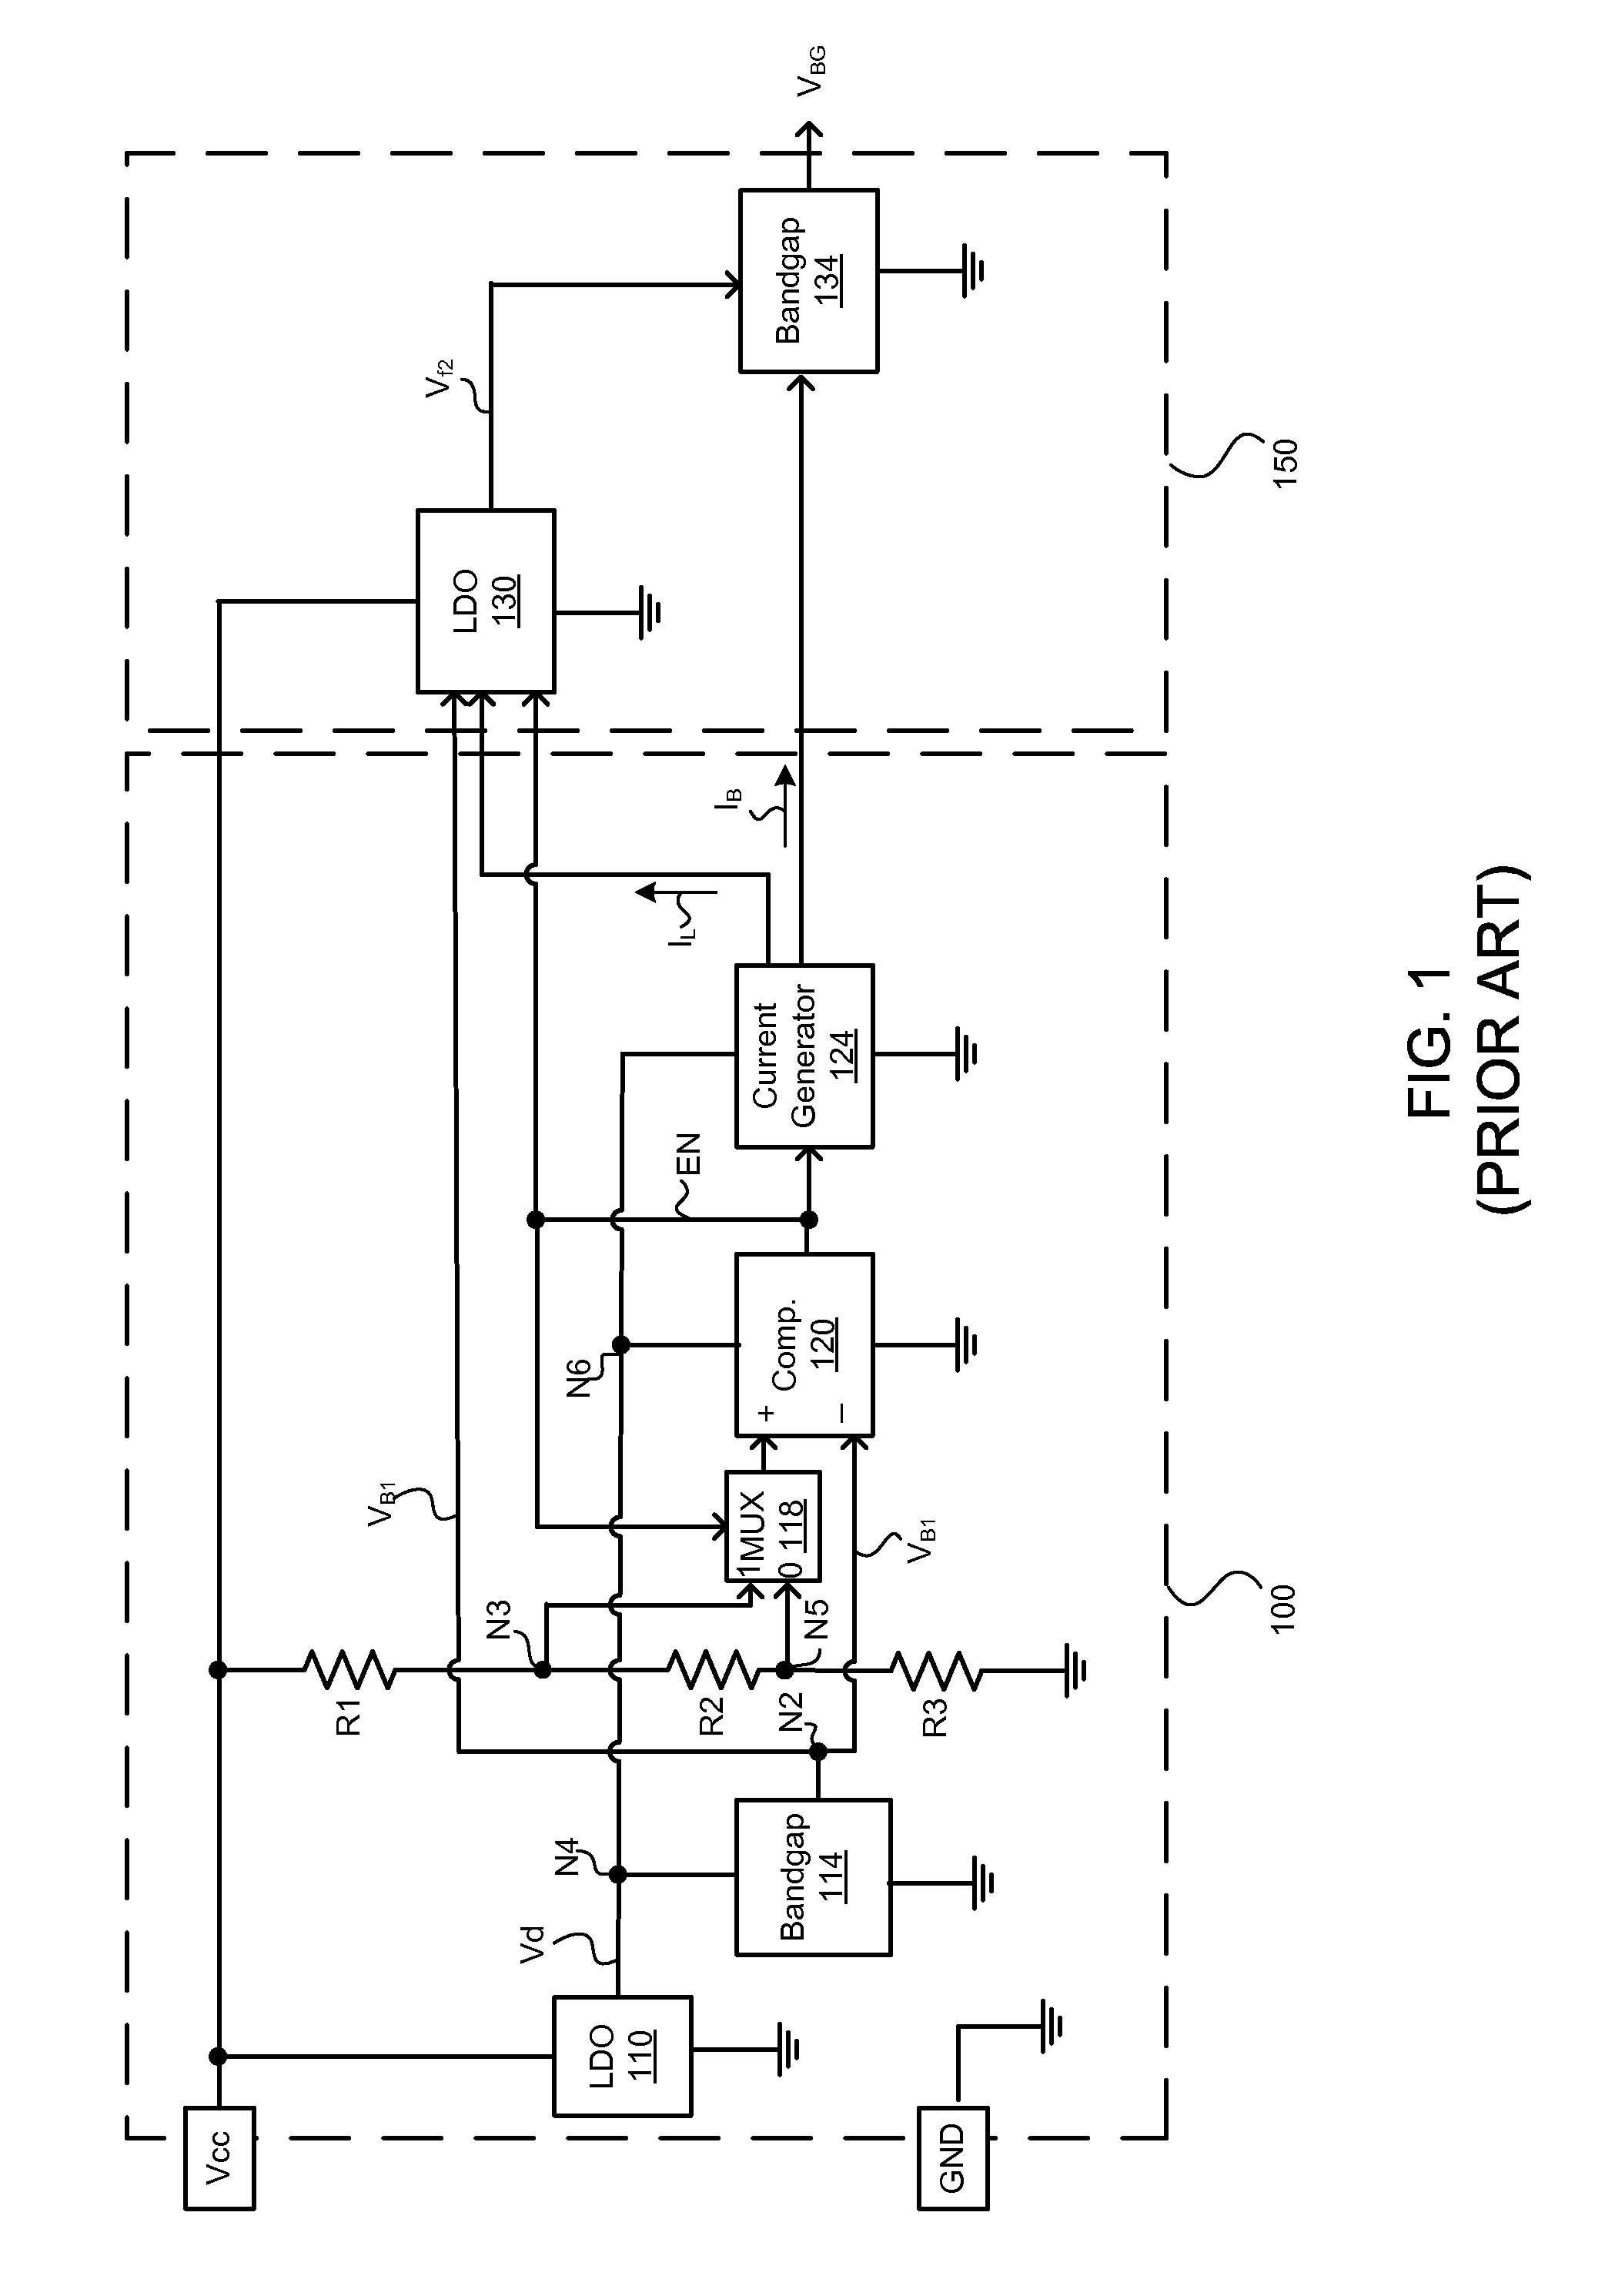 Low power consumption start-up circuit with dynamic switching